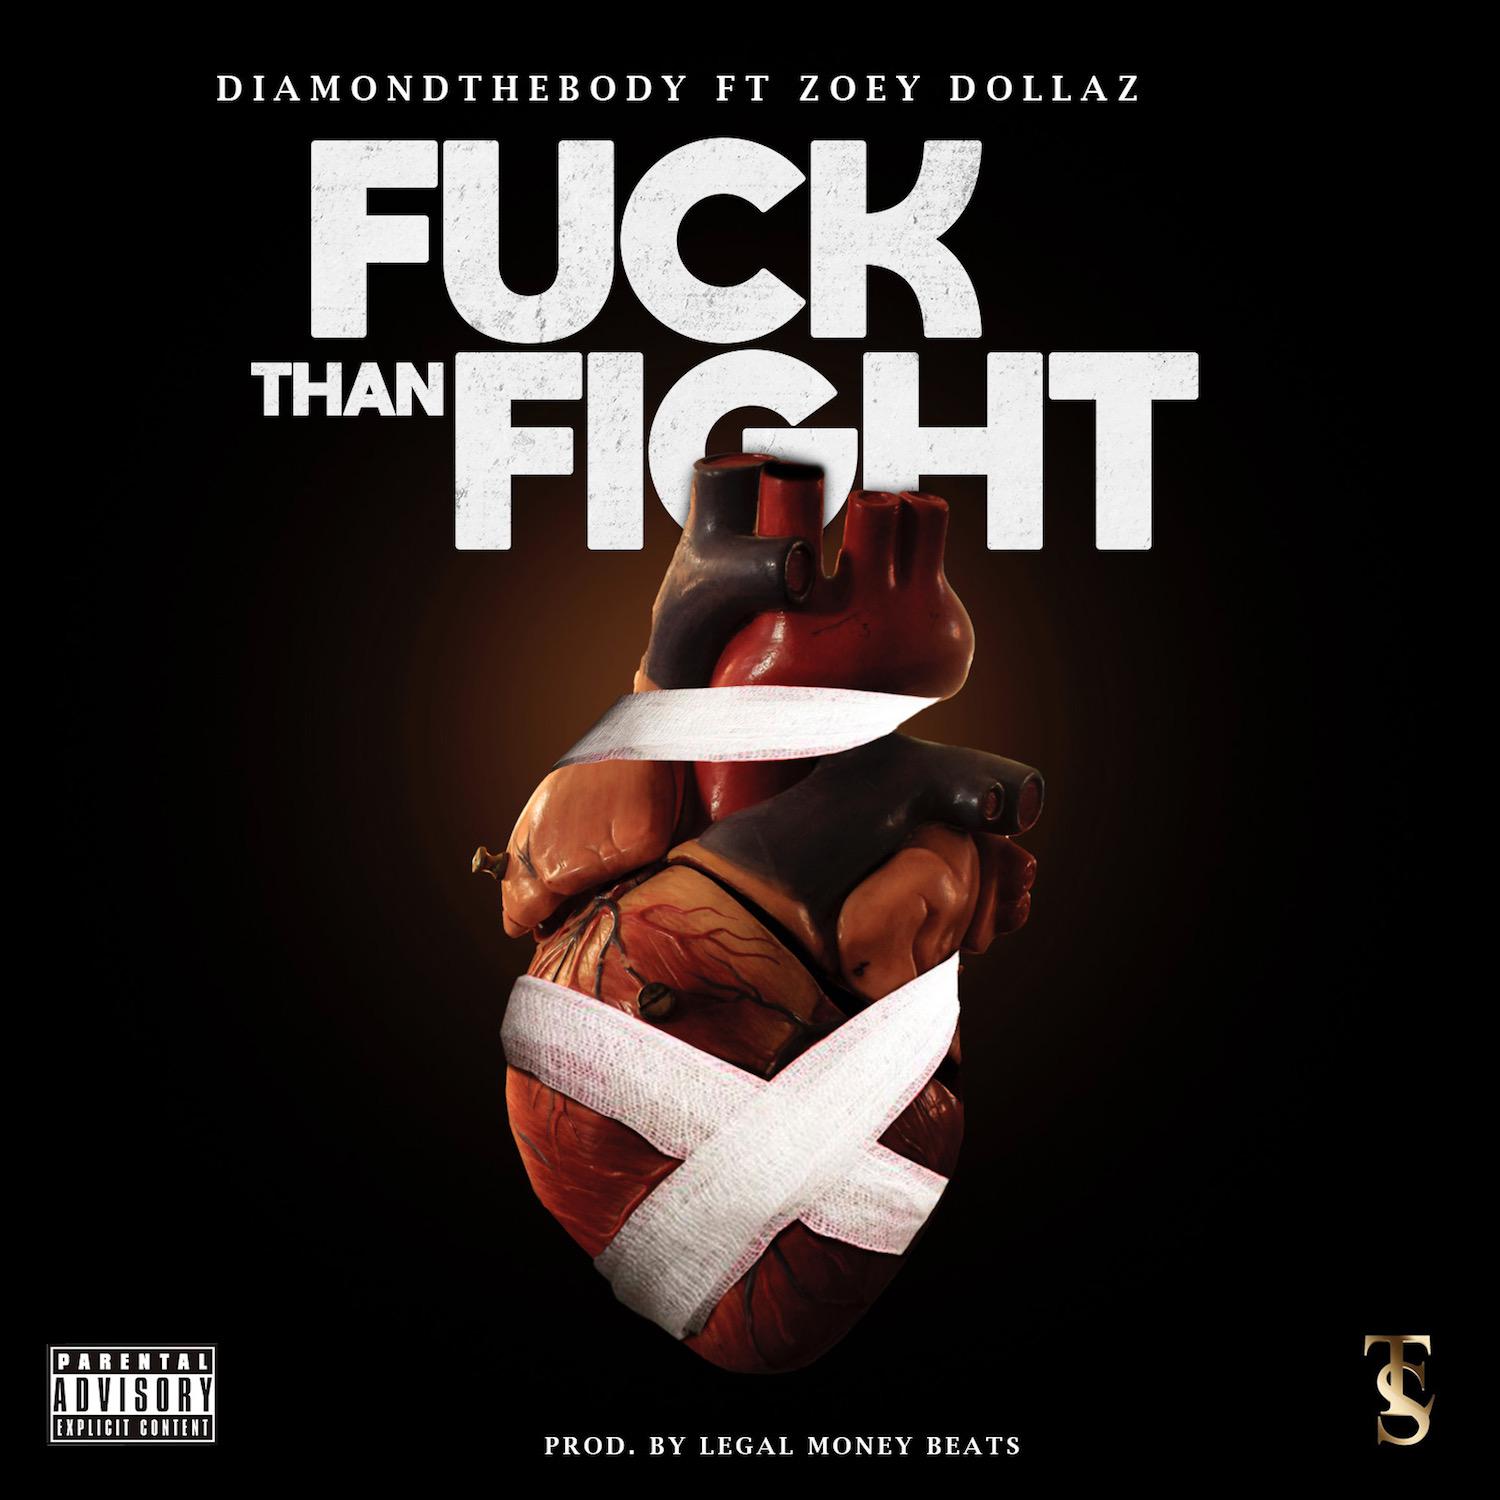 **** than Fight (feat. Zoey Dollaz)